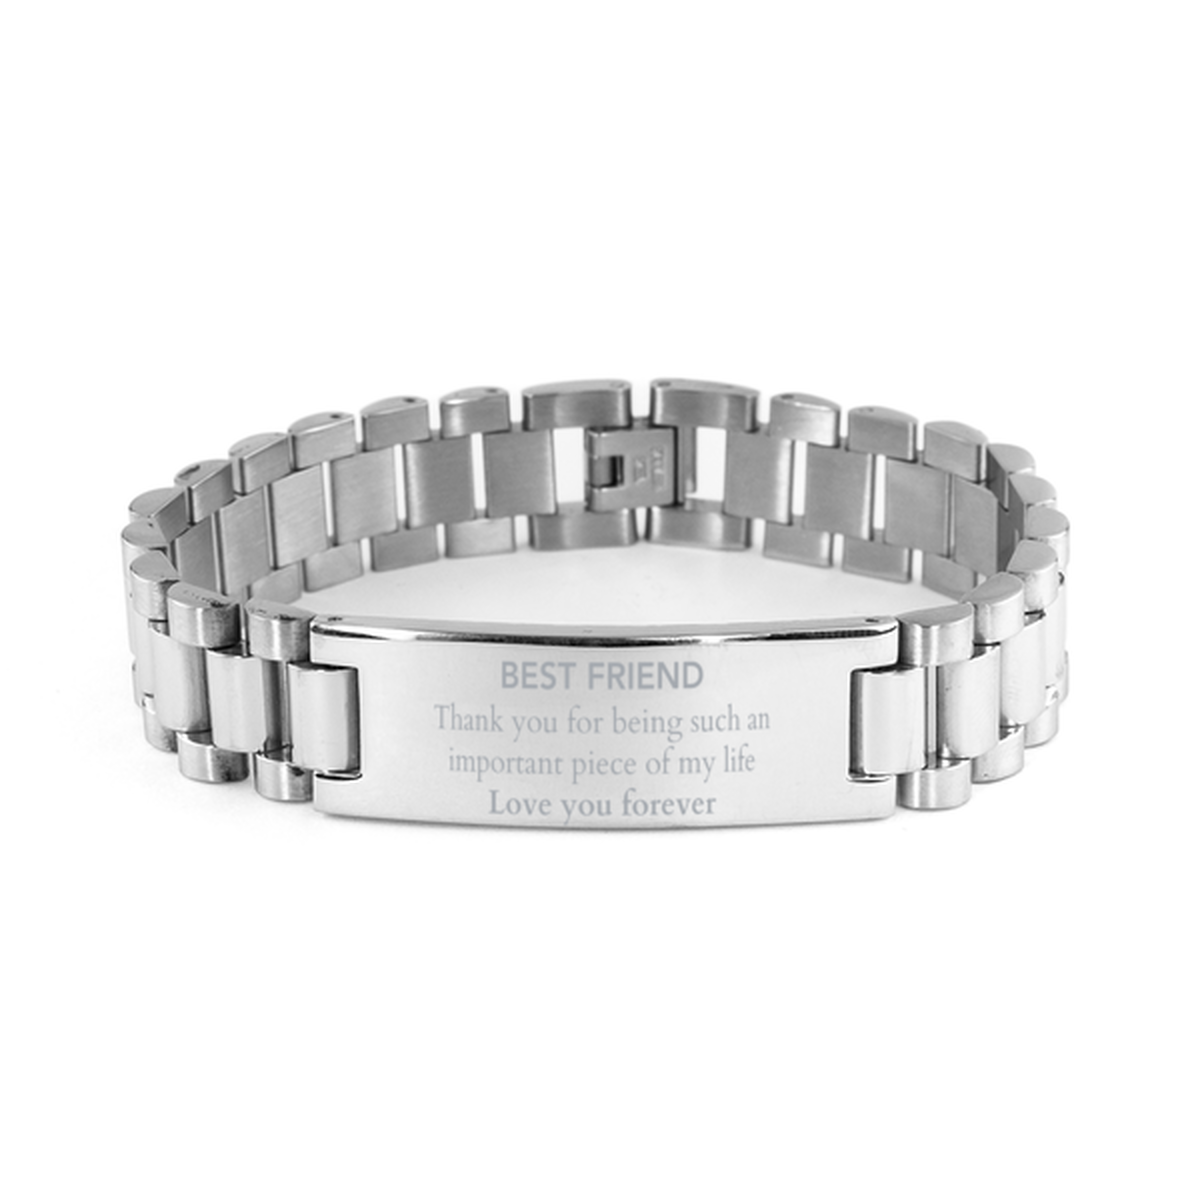 Appropriate Best Friend Ladder Stainless Steel Bracelet Epic Birthday Gifts for Best Friend Thank you for being such an important piece of my life Best Friend Christmas Mothers Fathers Day